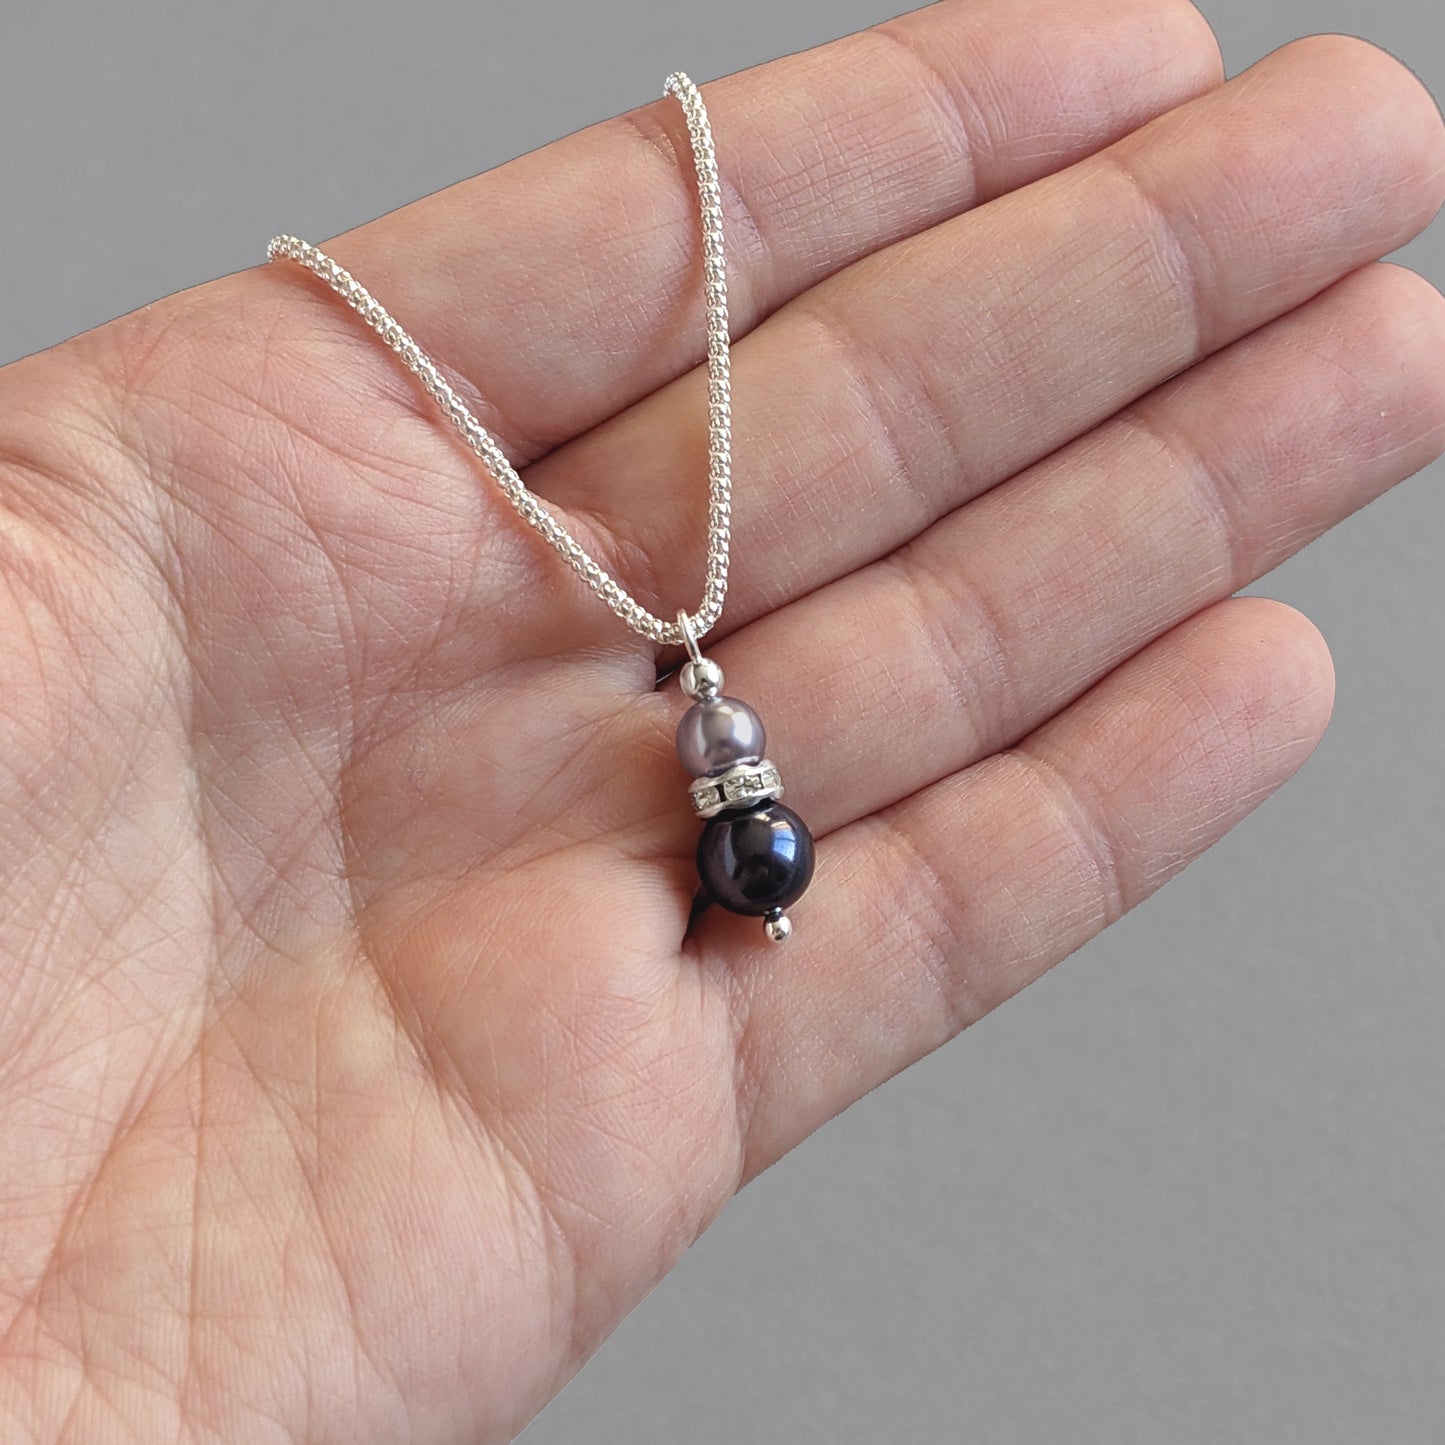 Dark purple and lilac pearl pendant necklace